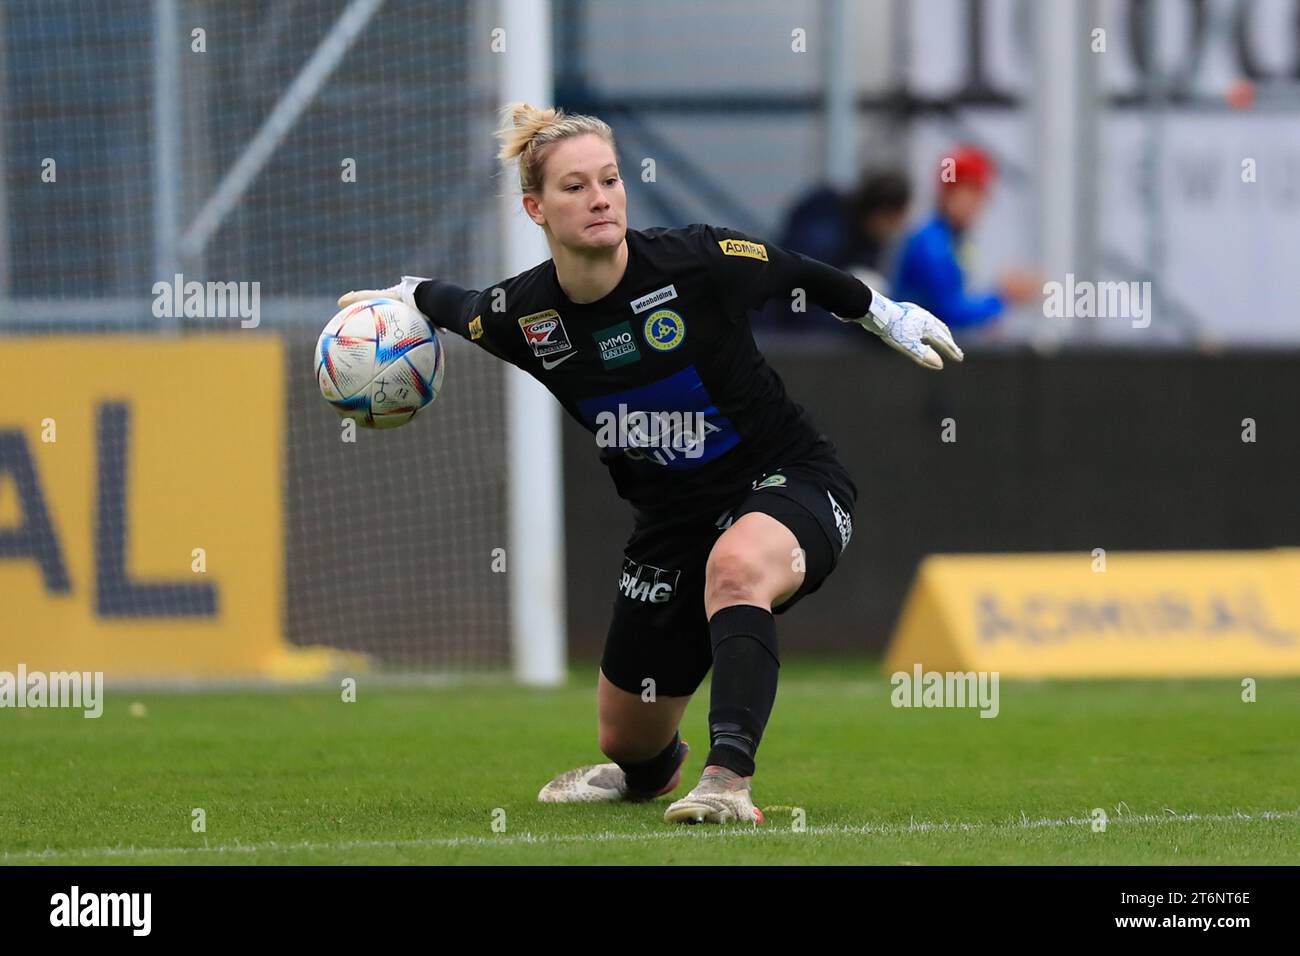 Pia Piplits (1 Vienna) in action during the Admiral Frauen Bundesliga match First Vienna FC vs Blau Weiss Linz at Hohe Warte  (Tom Seiss/ SPP) Stock Photo